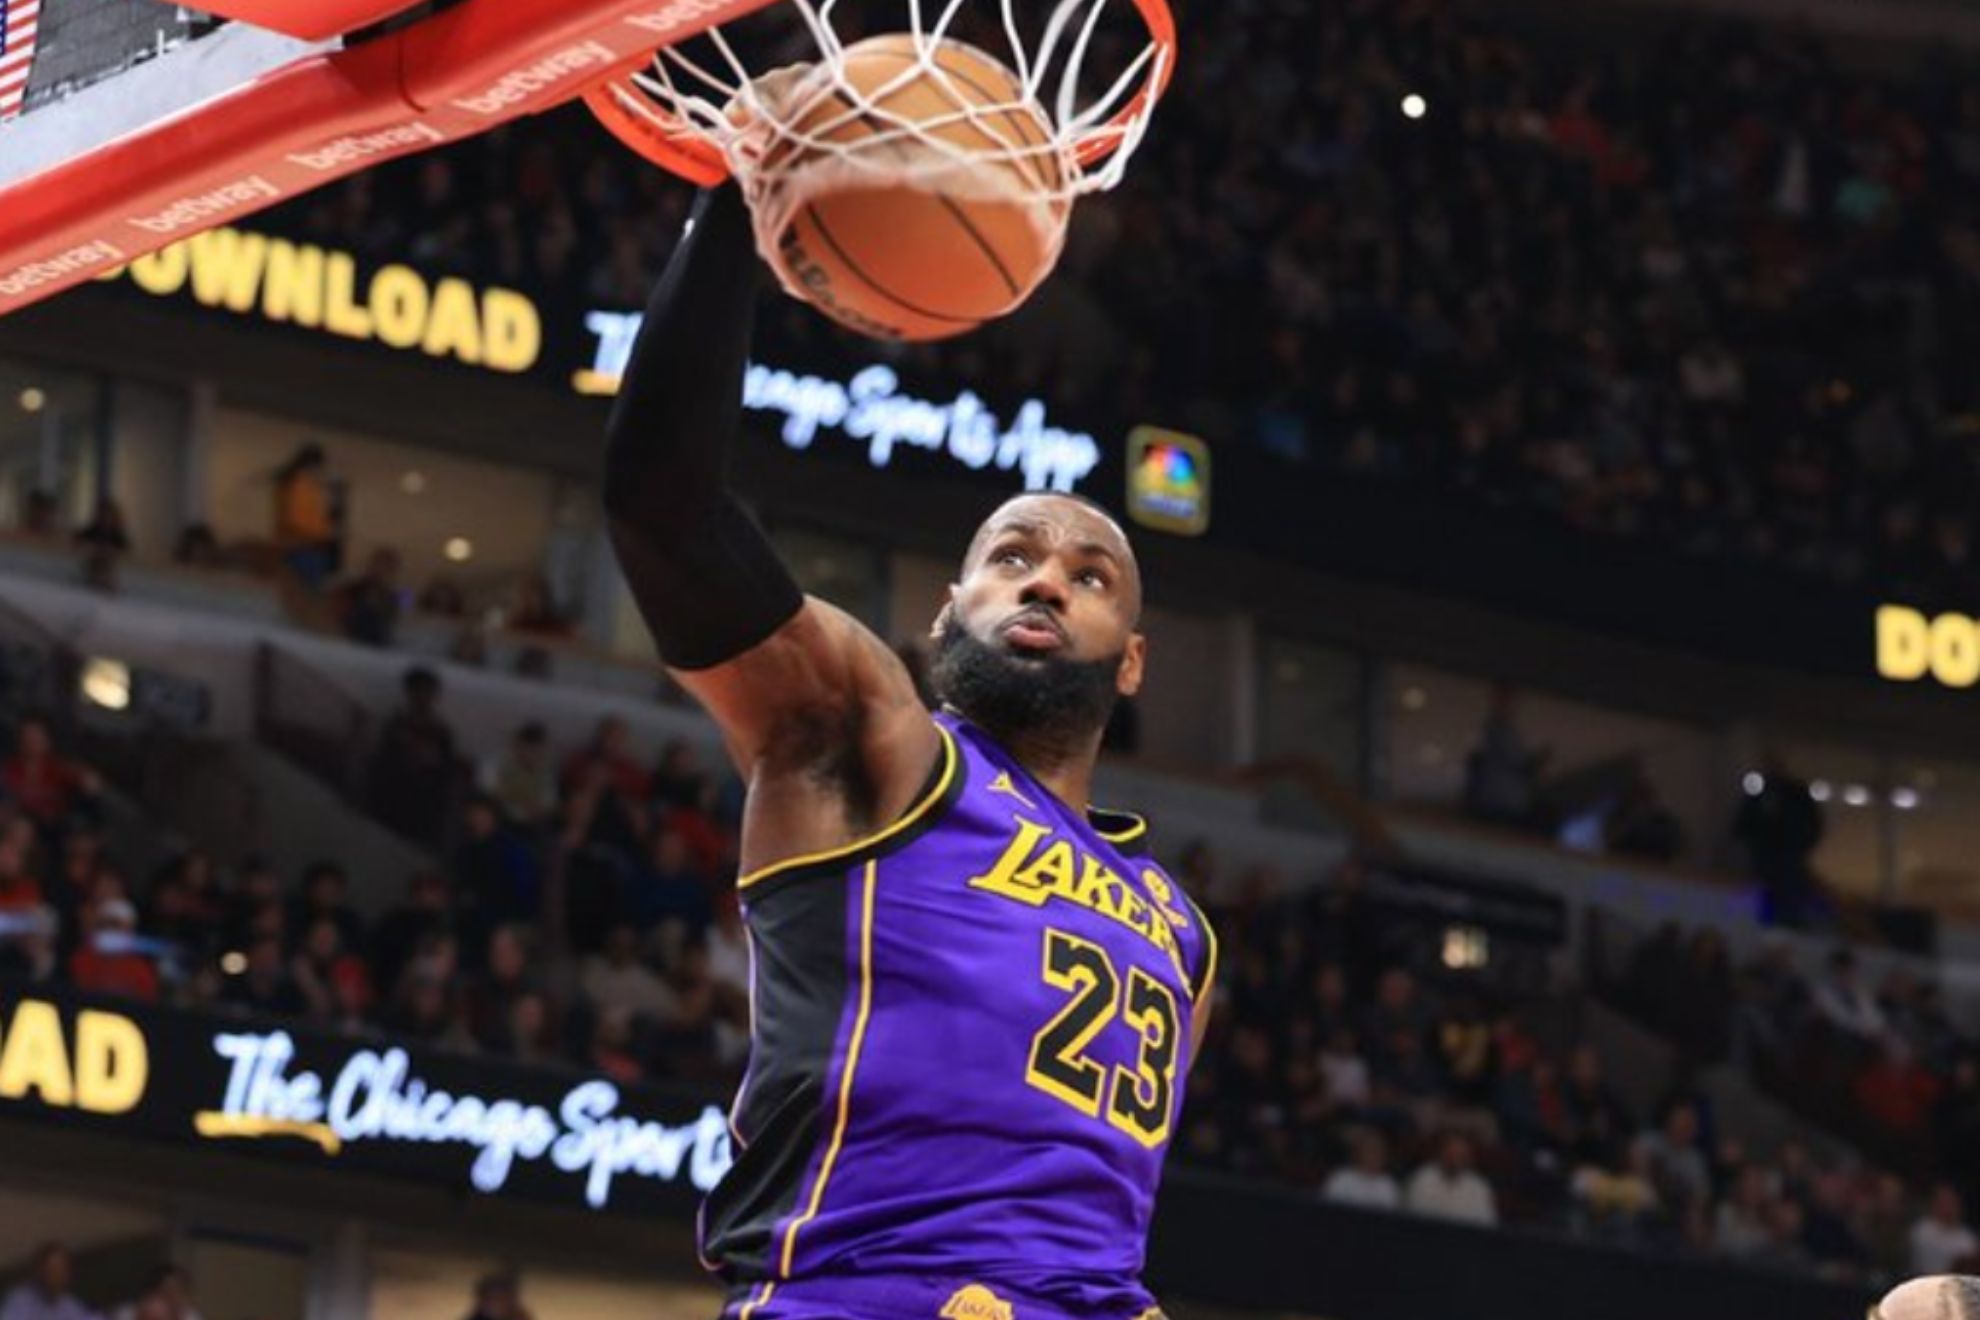 LeBron James wowed fans with a poweful one-handed jam against the Bulls on Wednesday.